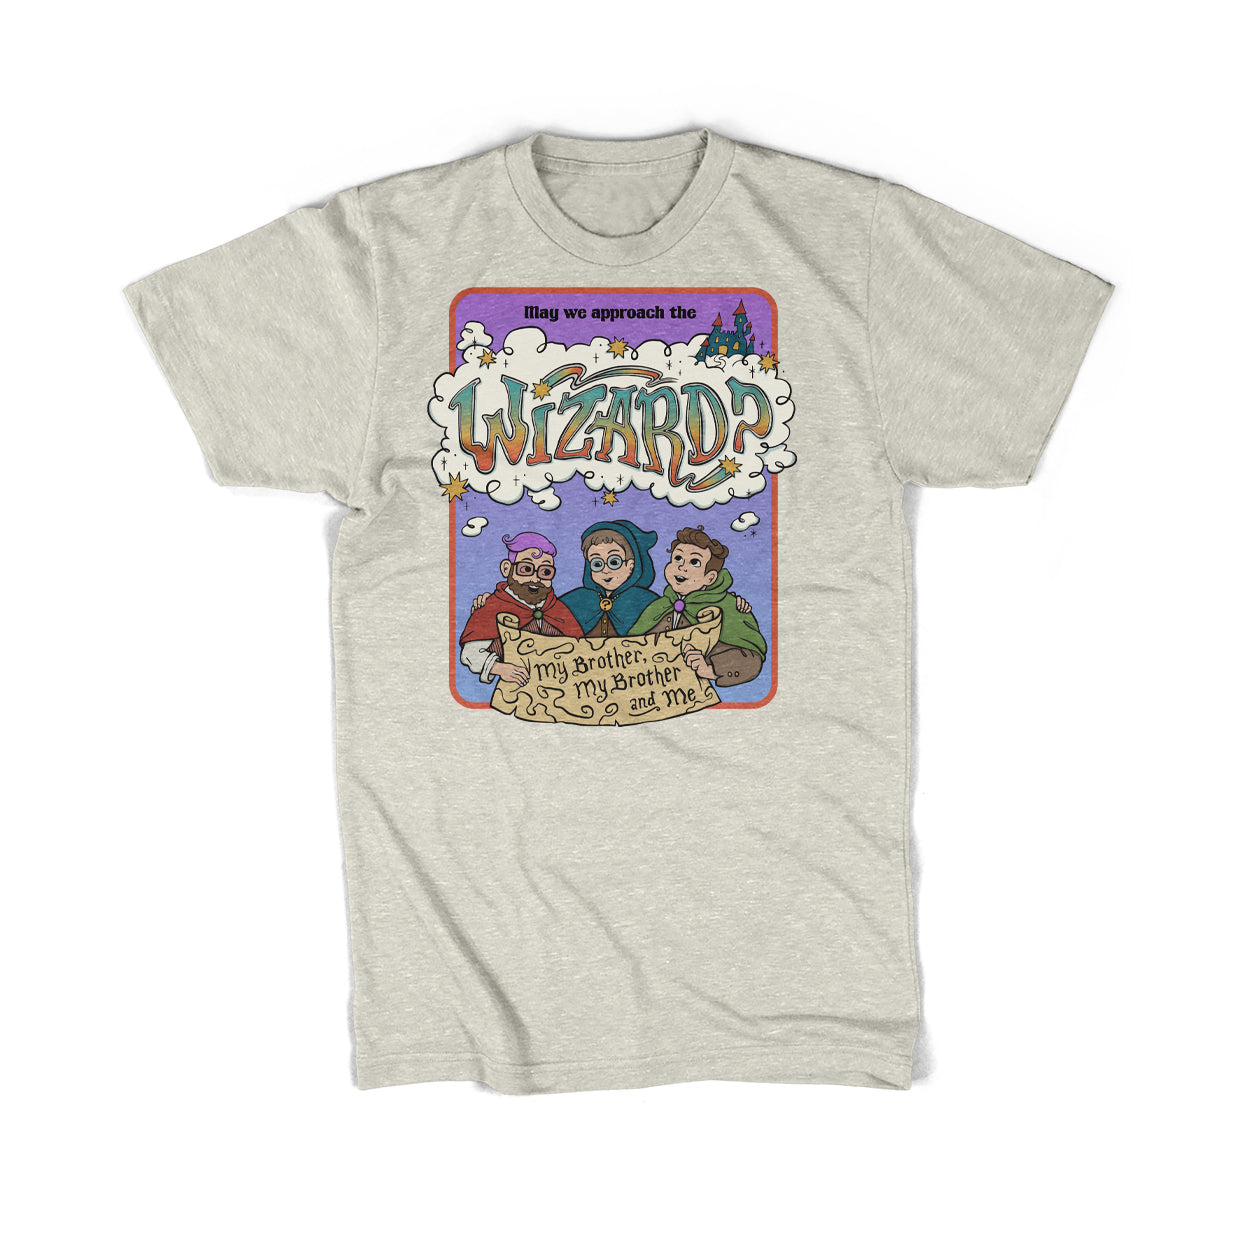 Image of the July McElroy merch item. It is a cream colored tee-shirt. On the front is an illustration of the McElroy brothers in colorful cloaks holding a scroll between them with a red border and purple gradient background. The scroll says, “My Brother, My Brother and Me.” Above them, the shirt says, “May we approach the Wizard?” “Wizard” is written in colorful, funky text inside a thought cloud above the brothers’ heads. Around the shirt are sparkles and yellow bursts of color.